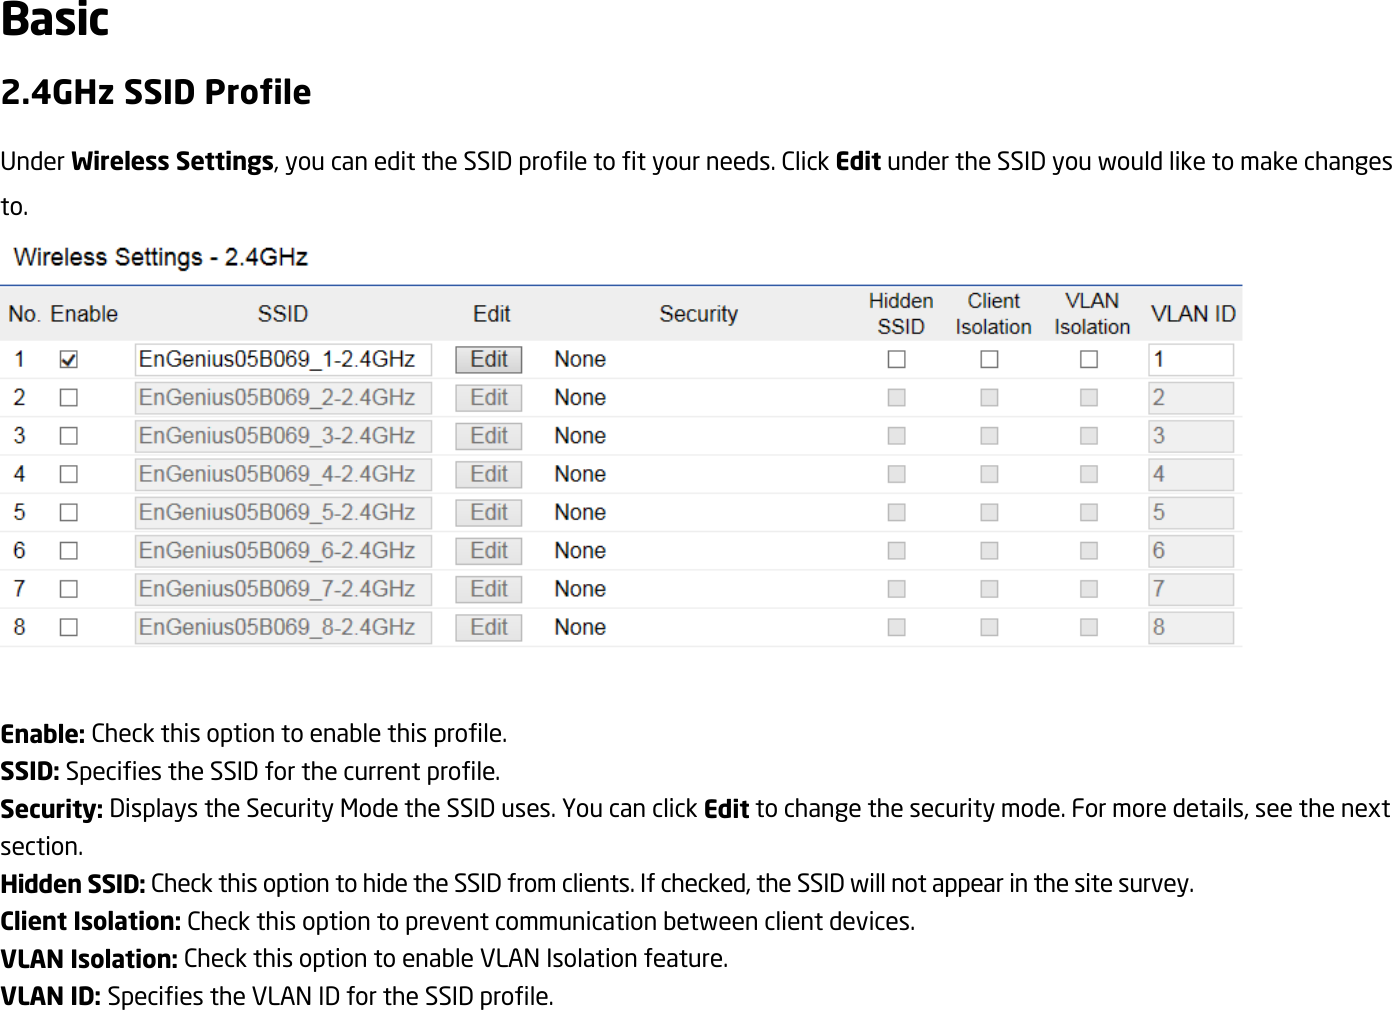 Basic 2.4GHz SSID Profile Under Wireless Settings, you can edit the SSID profile to fit your needs. Click Edit under the SSID you would like to make changes to.   Enable: Check this option to enable this profile. SSID: Specifies the SSID for the current profile. Security: Displays the Security Mode the SSID uses. You can click Edit to change the security mode. For more details, see the next section. Hidden SSID: Check this option to hide the SSID from clients. If checked, the SSID will not appear in the site survey. Client Isolation: Check this option to prevent communication between client devices. VLAN Isolation: Check this option to enable VLAN Isolation feature. VLAN ID: Specifies the VLAN ID for the SSID profile. 